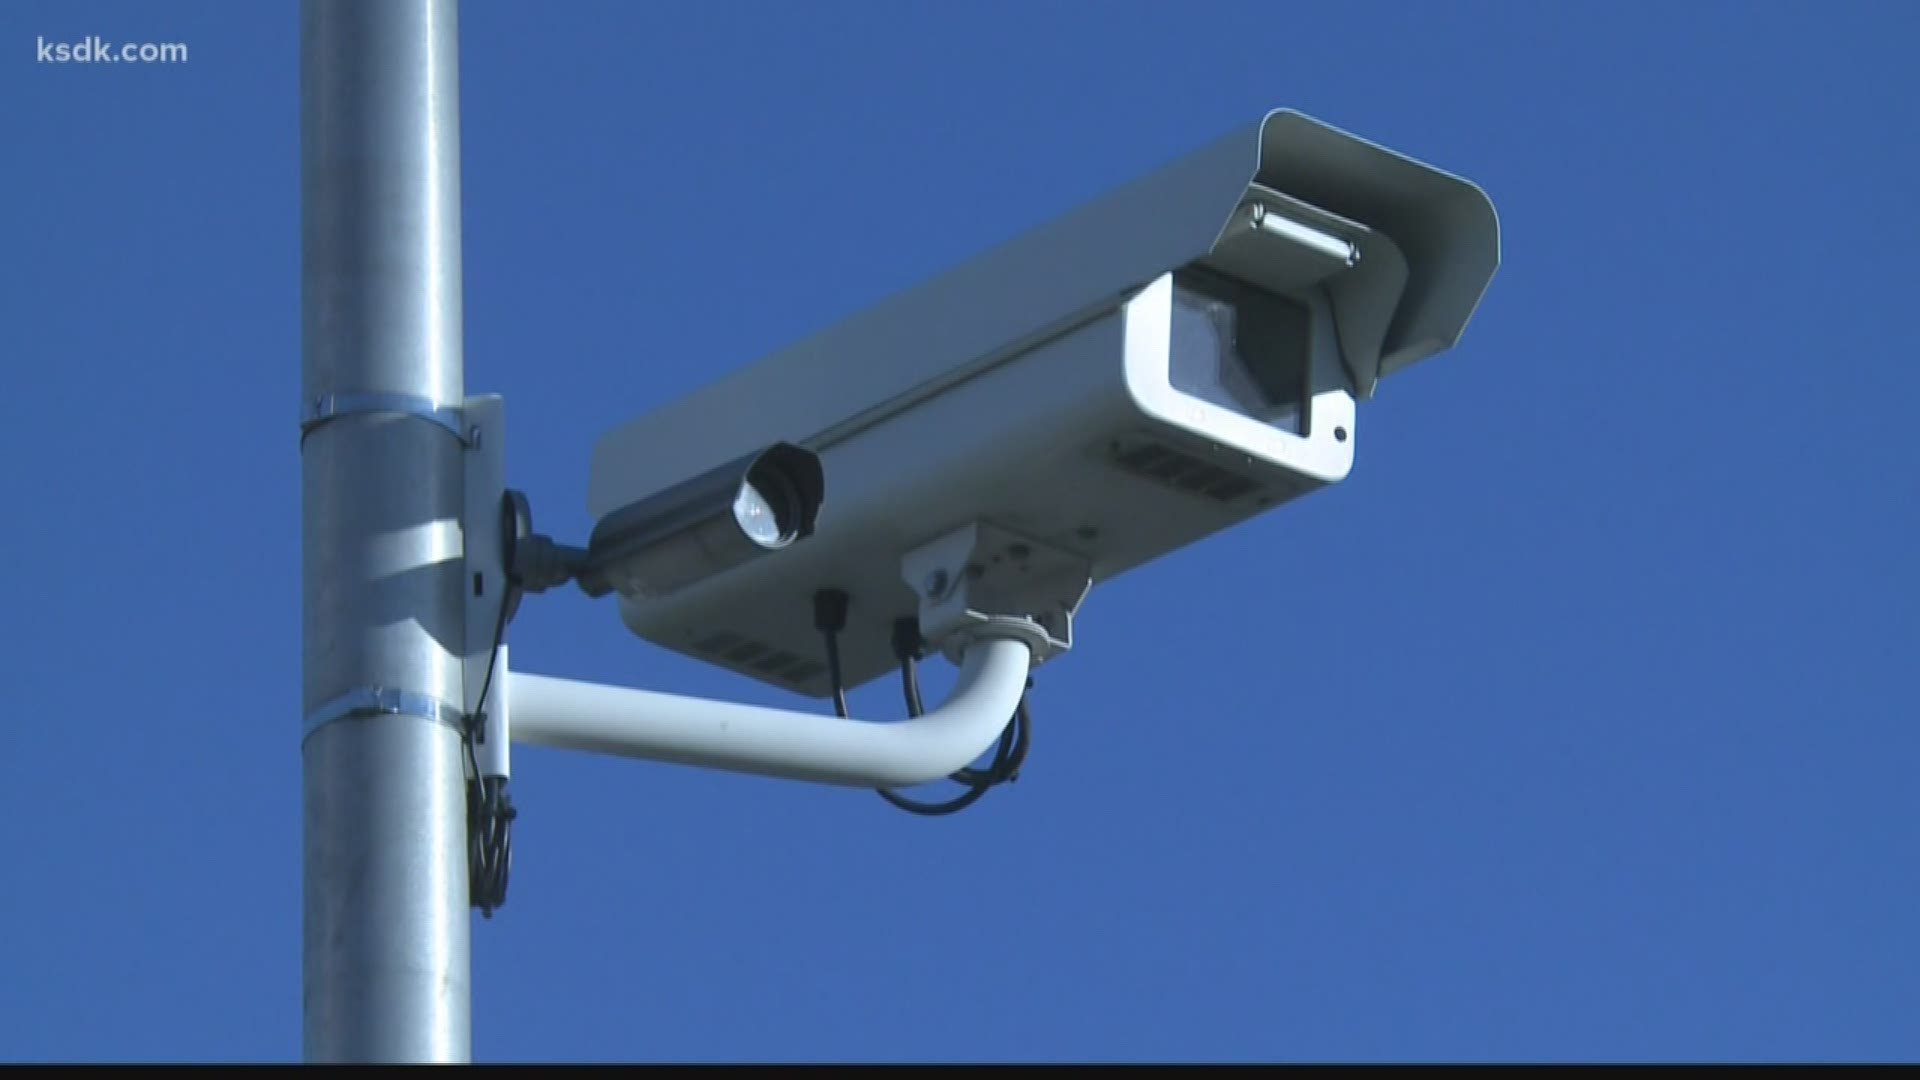 We haven't seen red-light cameras in St. Louis for a few years. But now the city is considering bringing them back, and those tickets that come with them.